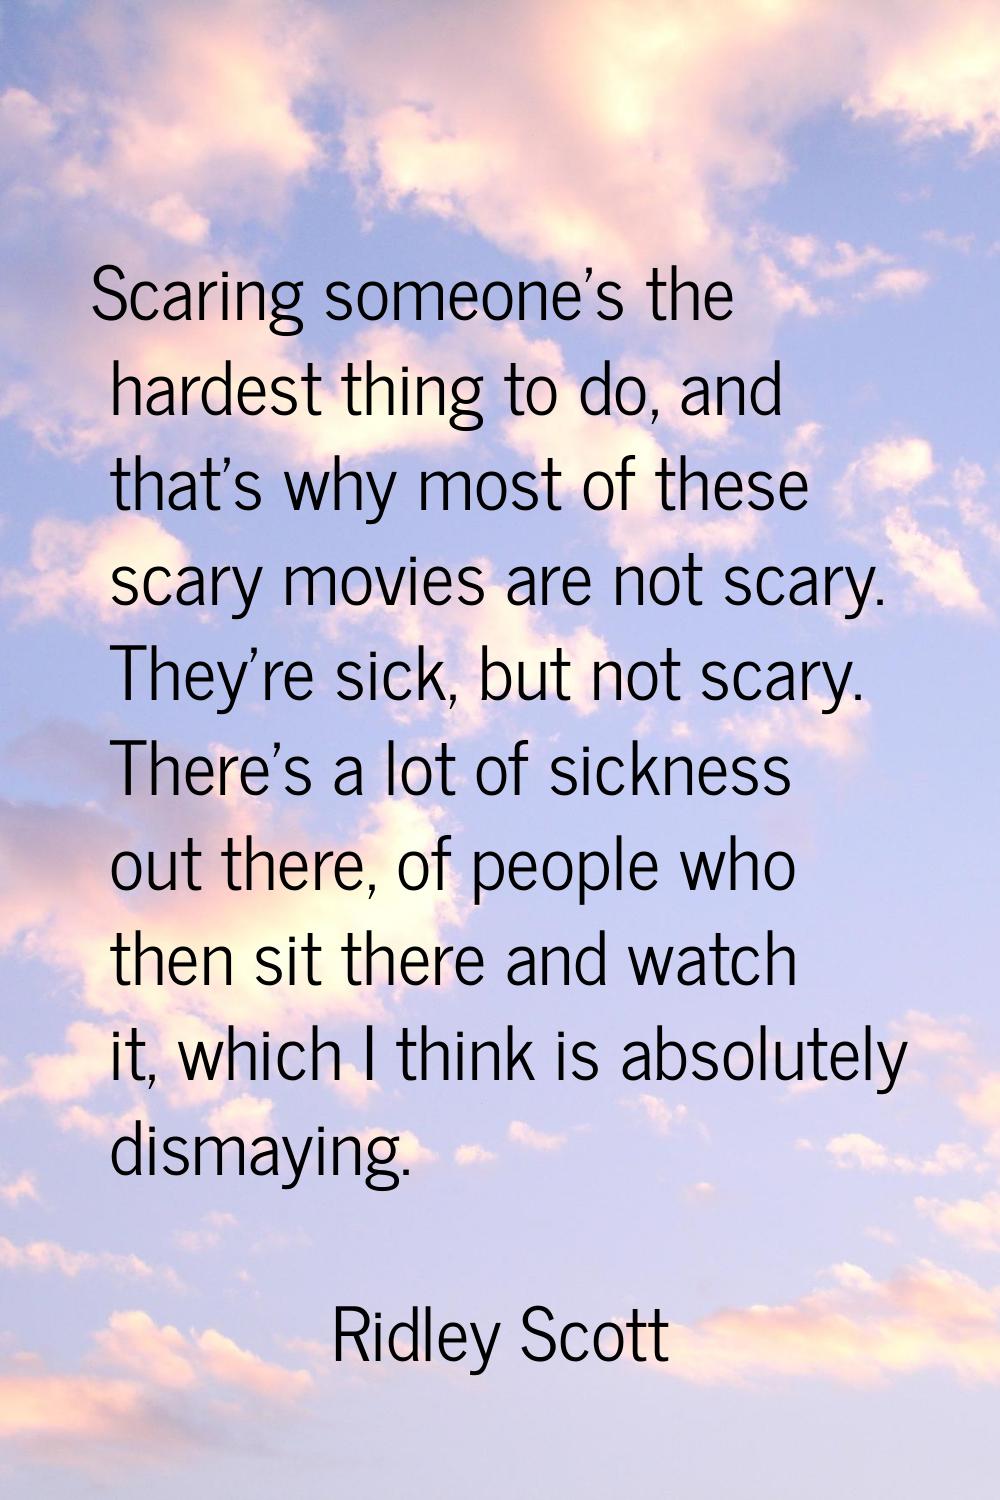 Scaring someone's the hardest thing to do, and that's why most of these scary movies are not scary.